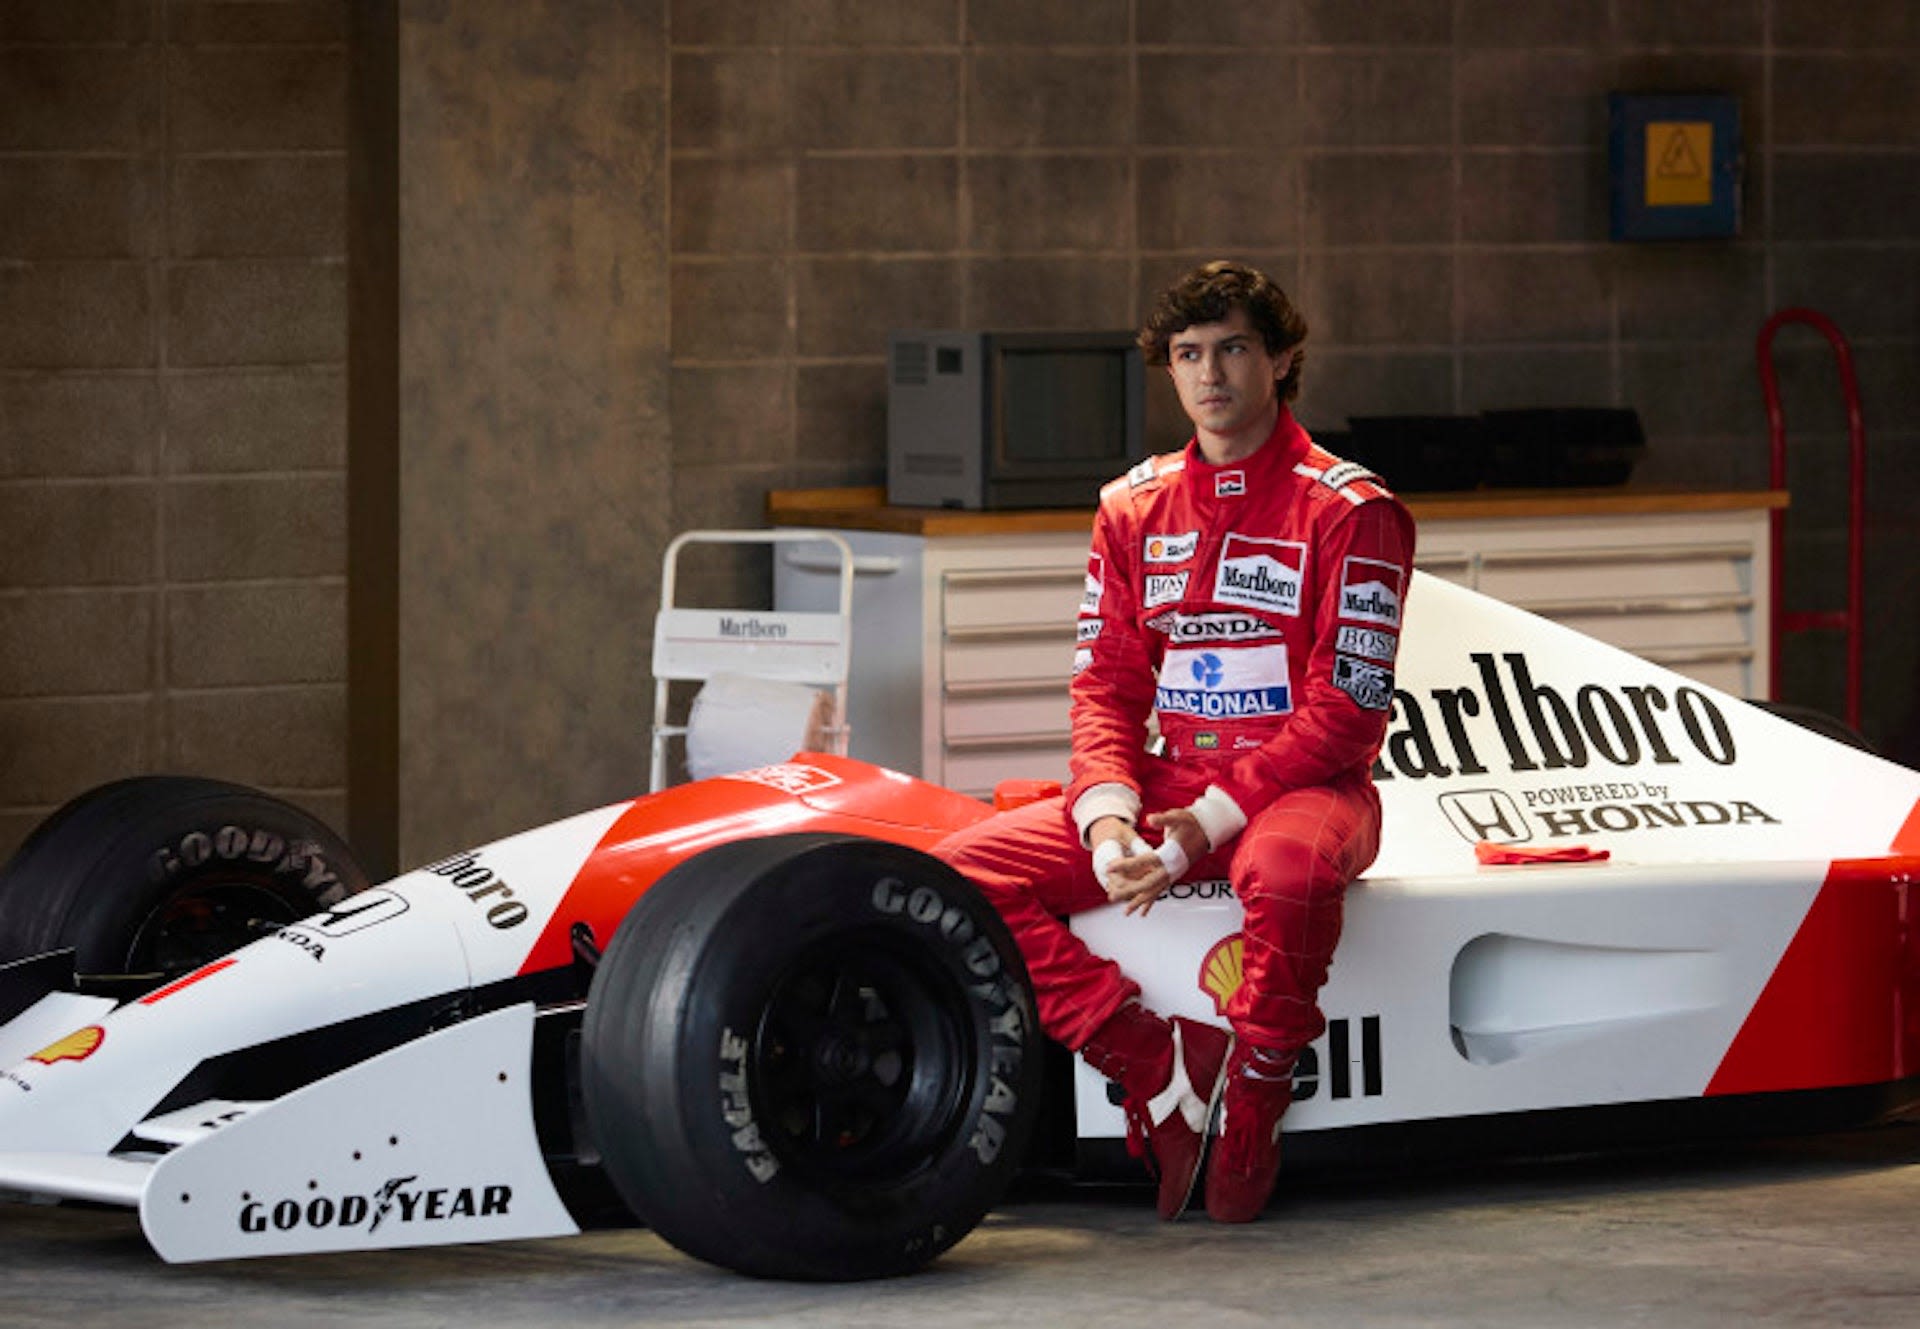 Here's the First Trailer of the New Senna Netflix Series